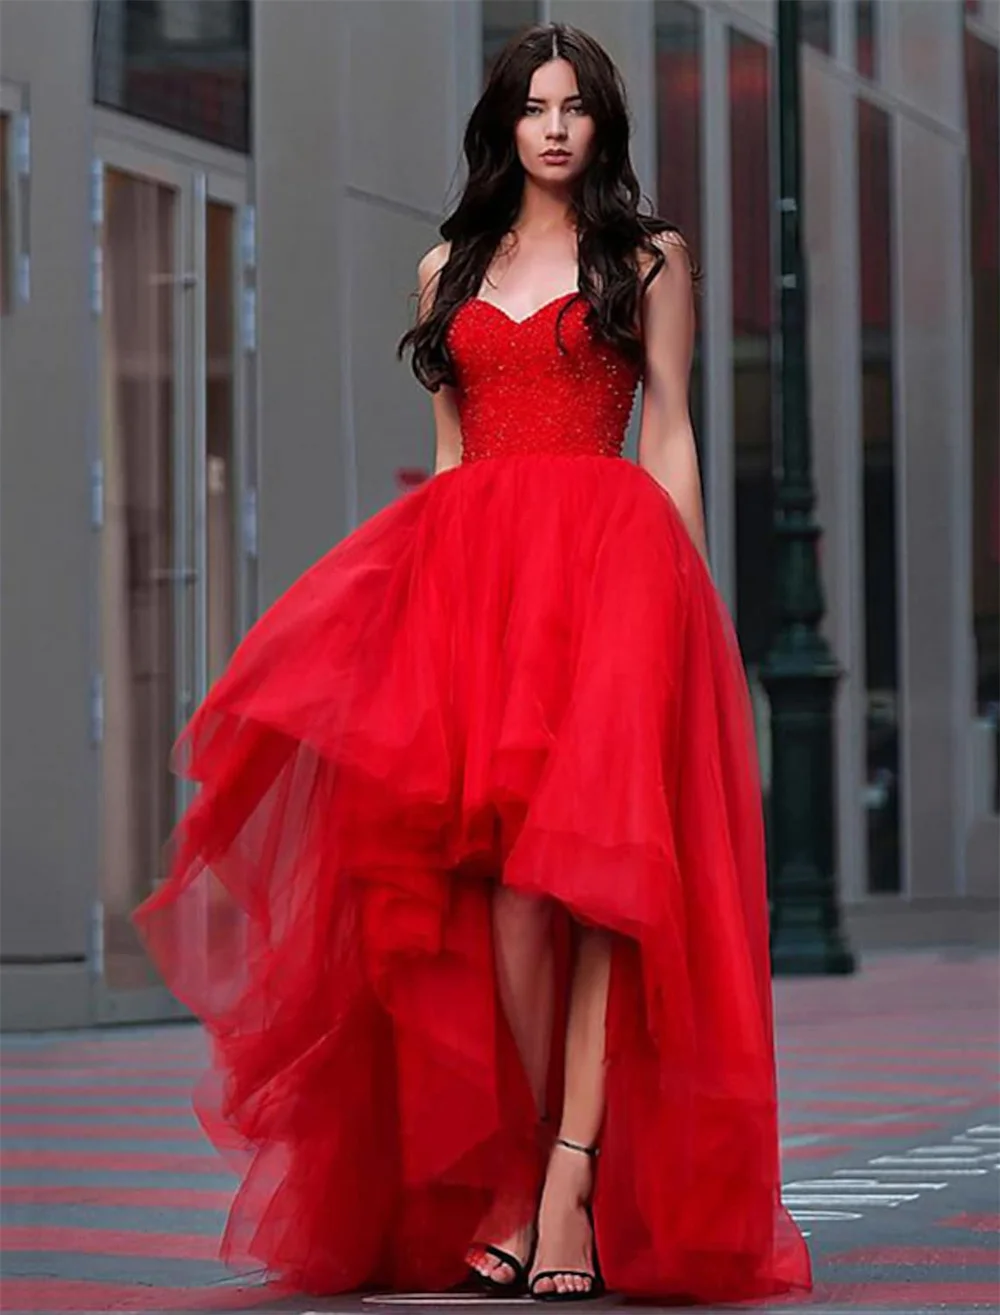 

A-Line Luxurious Elegant Party Wear Prom Birthday Dress Sweetheart Neckline Sleeveless Floor Length Tulle with Pleats 2022